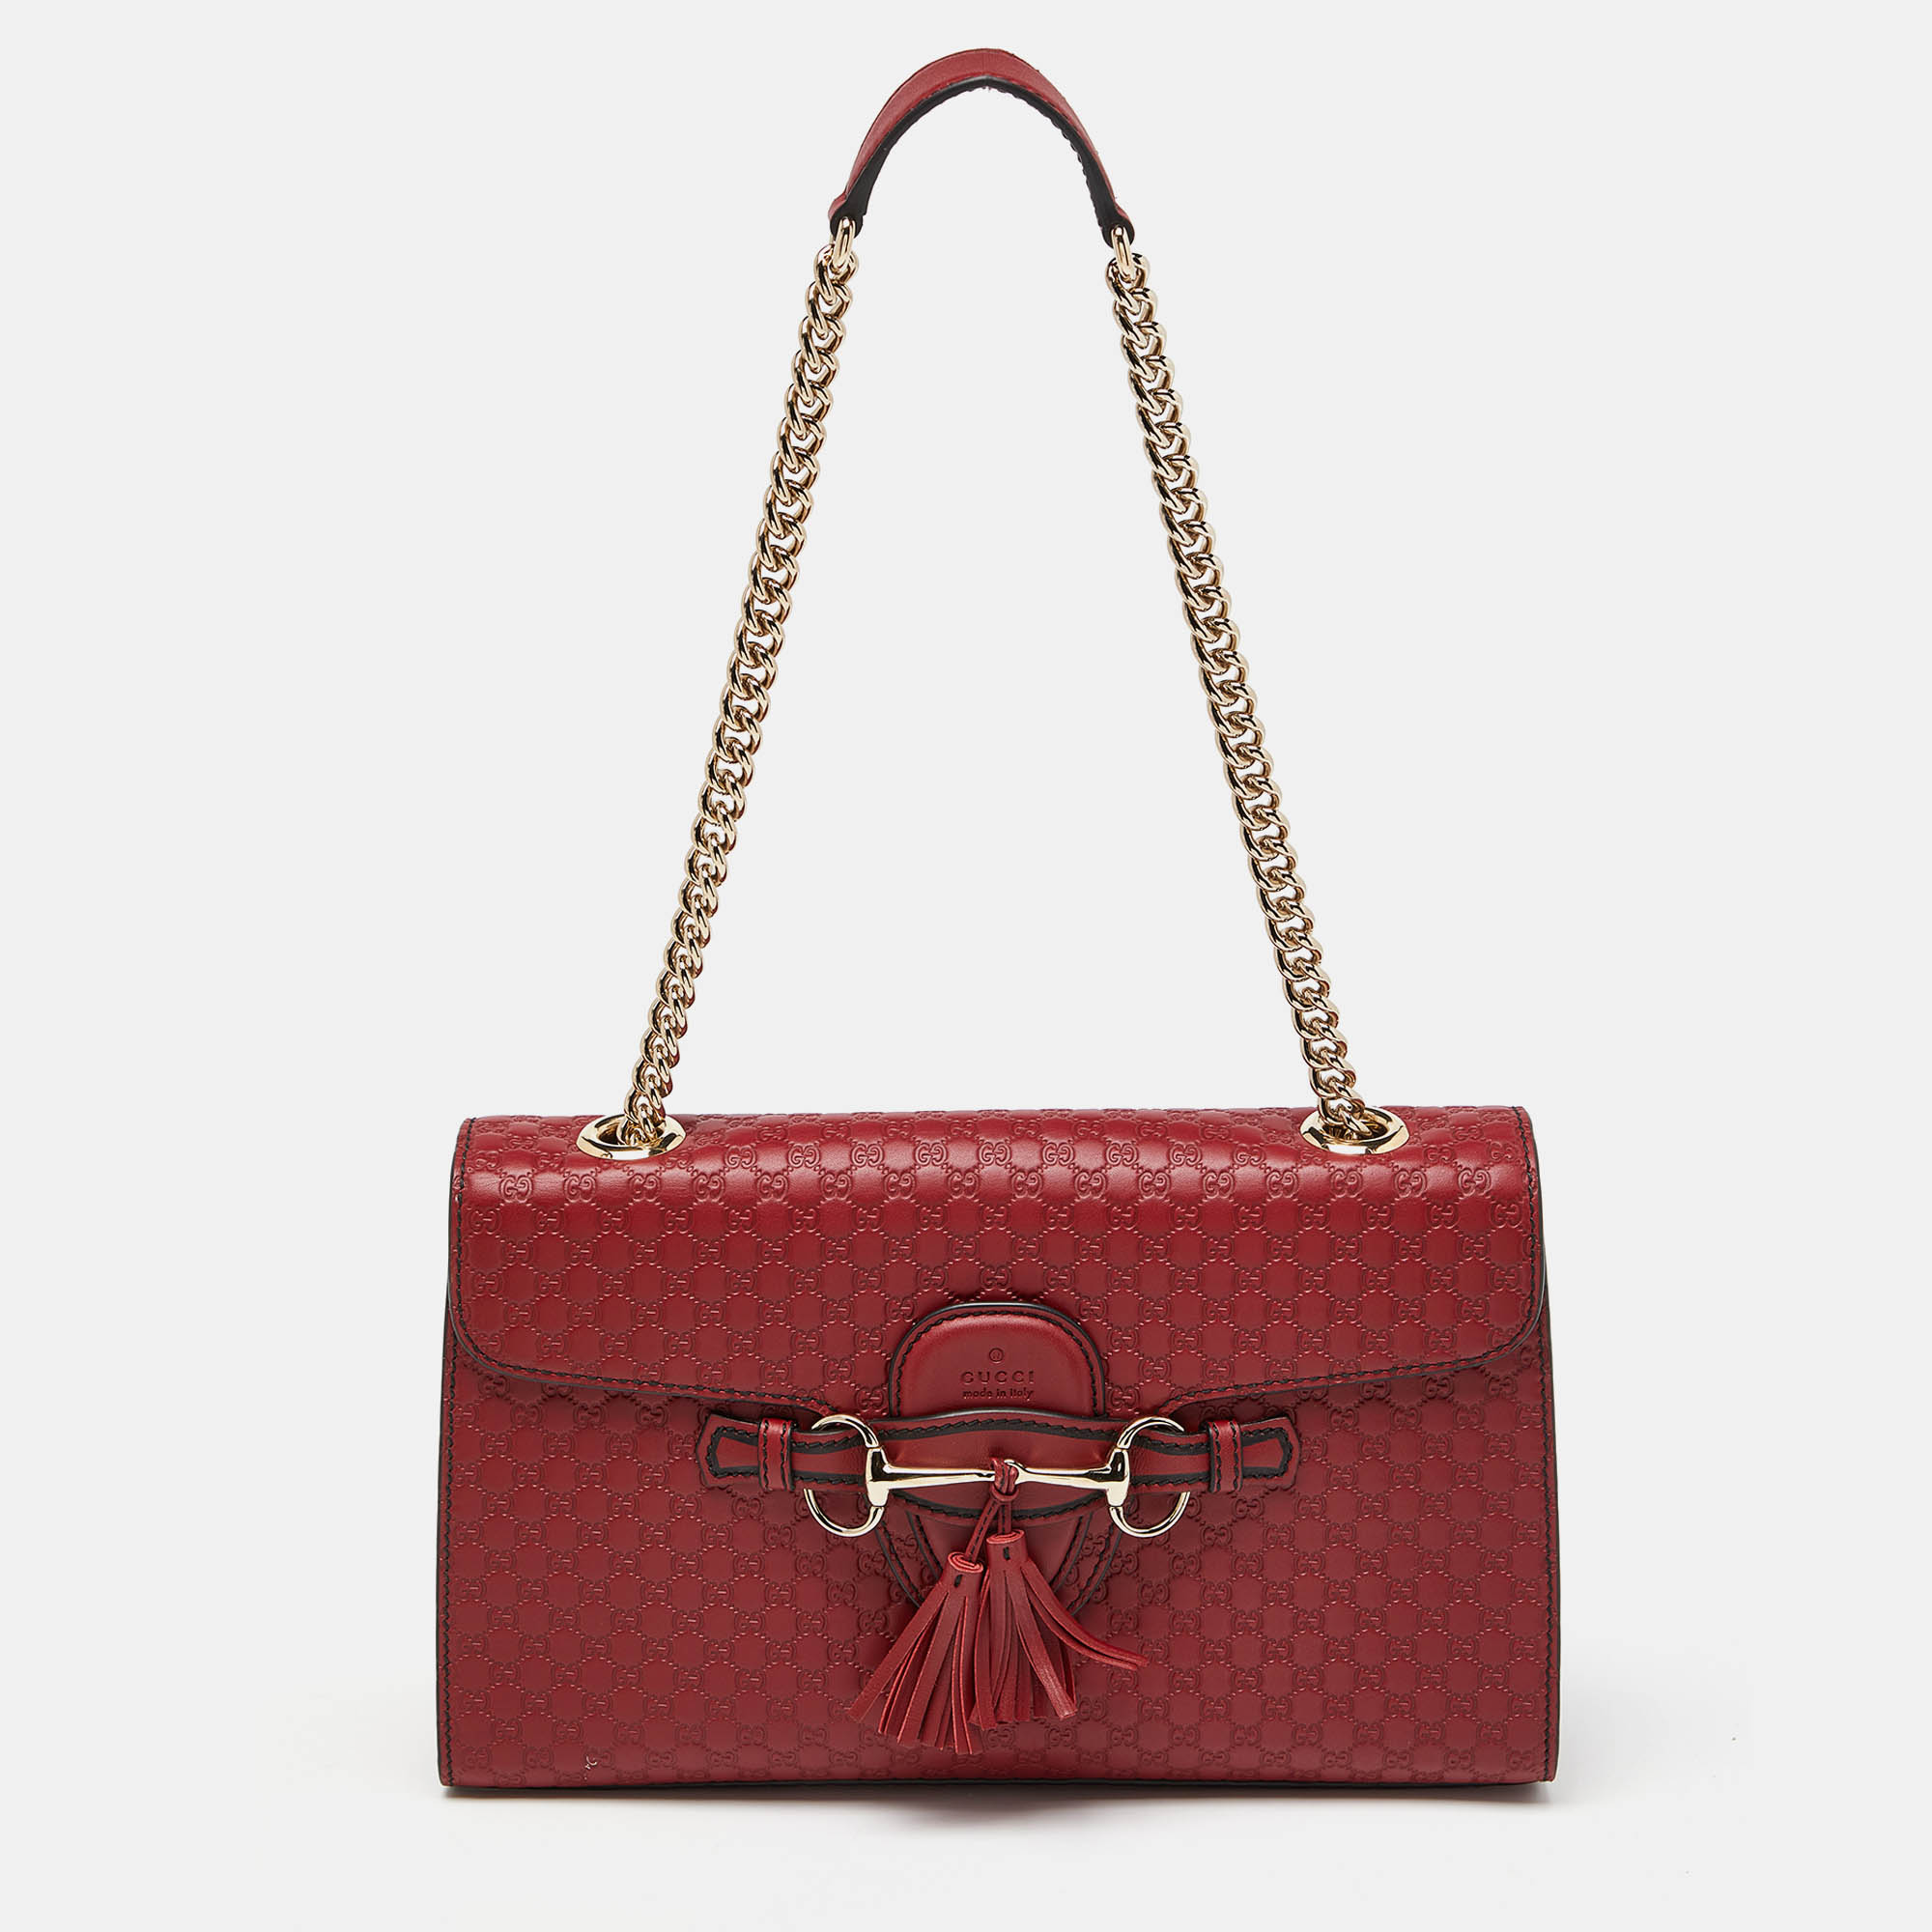 Gucci red microguccissima leather medium emily chain shoulder bag